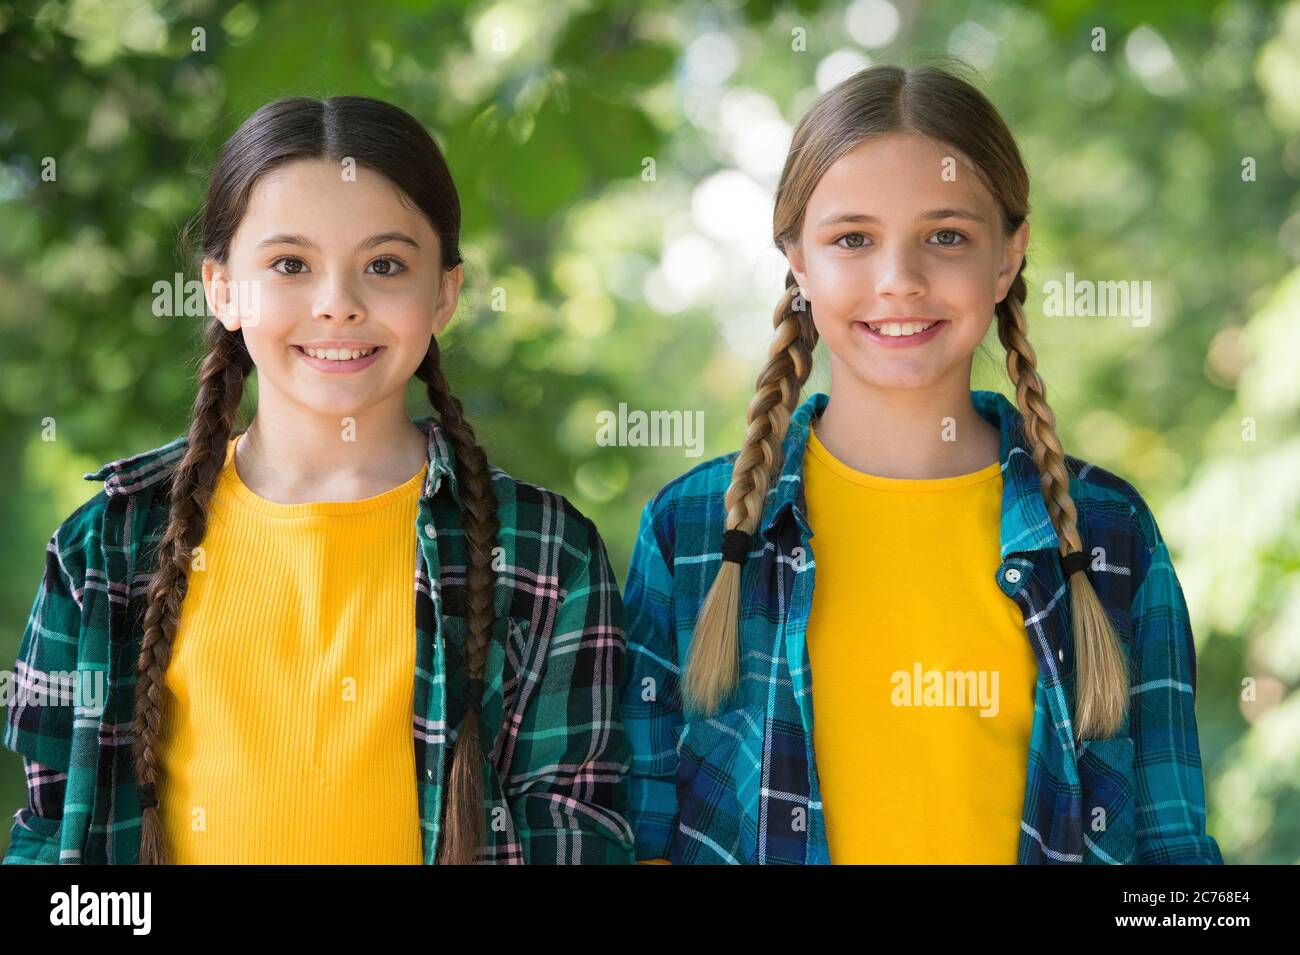 As distinctive as you are. Happy children smile sunny outdoors. Little children enjoy summer holidays. Beauty look of small children. Casual style trend. Happy childhood. International childrens day. Stock Photo